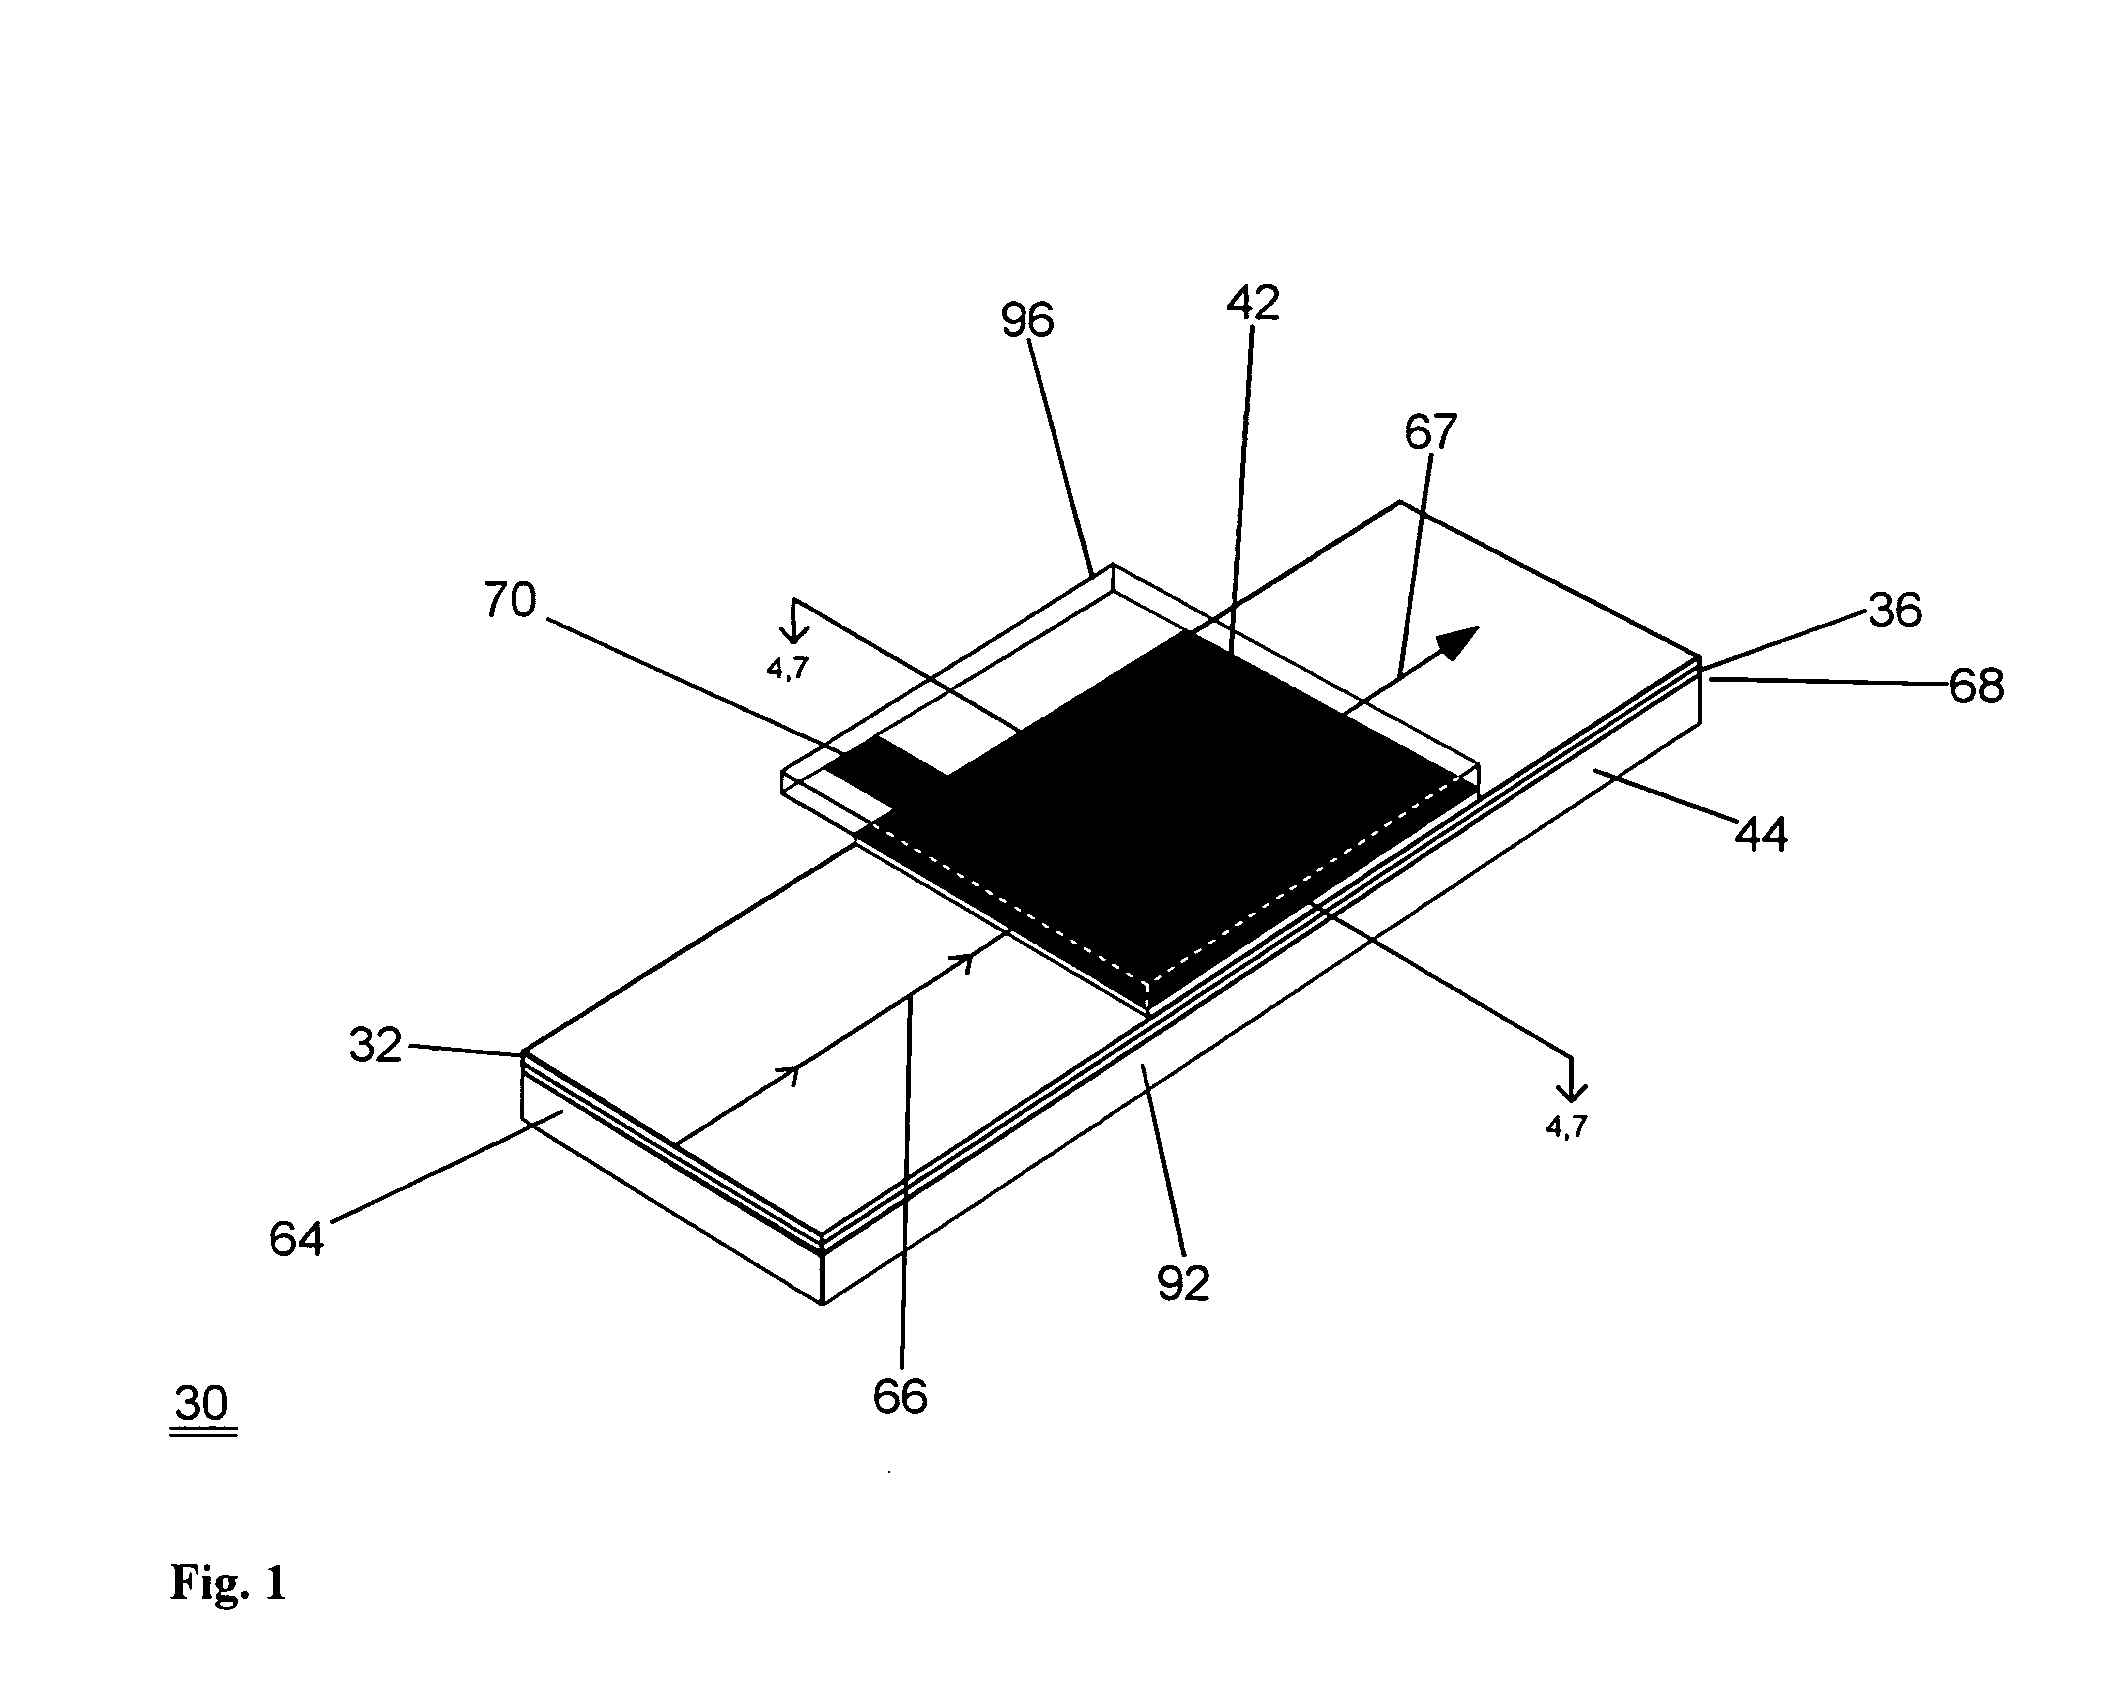 Liquid crystal waveguide having two or more control voltages for controlling polarized light